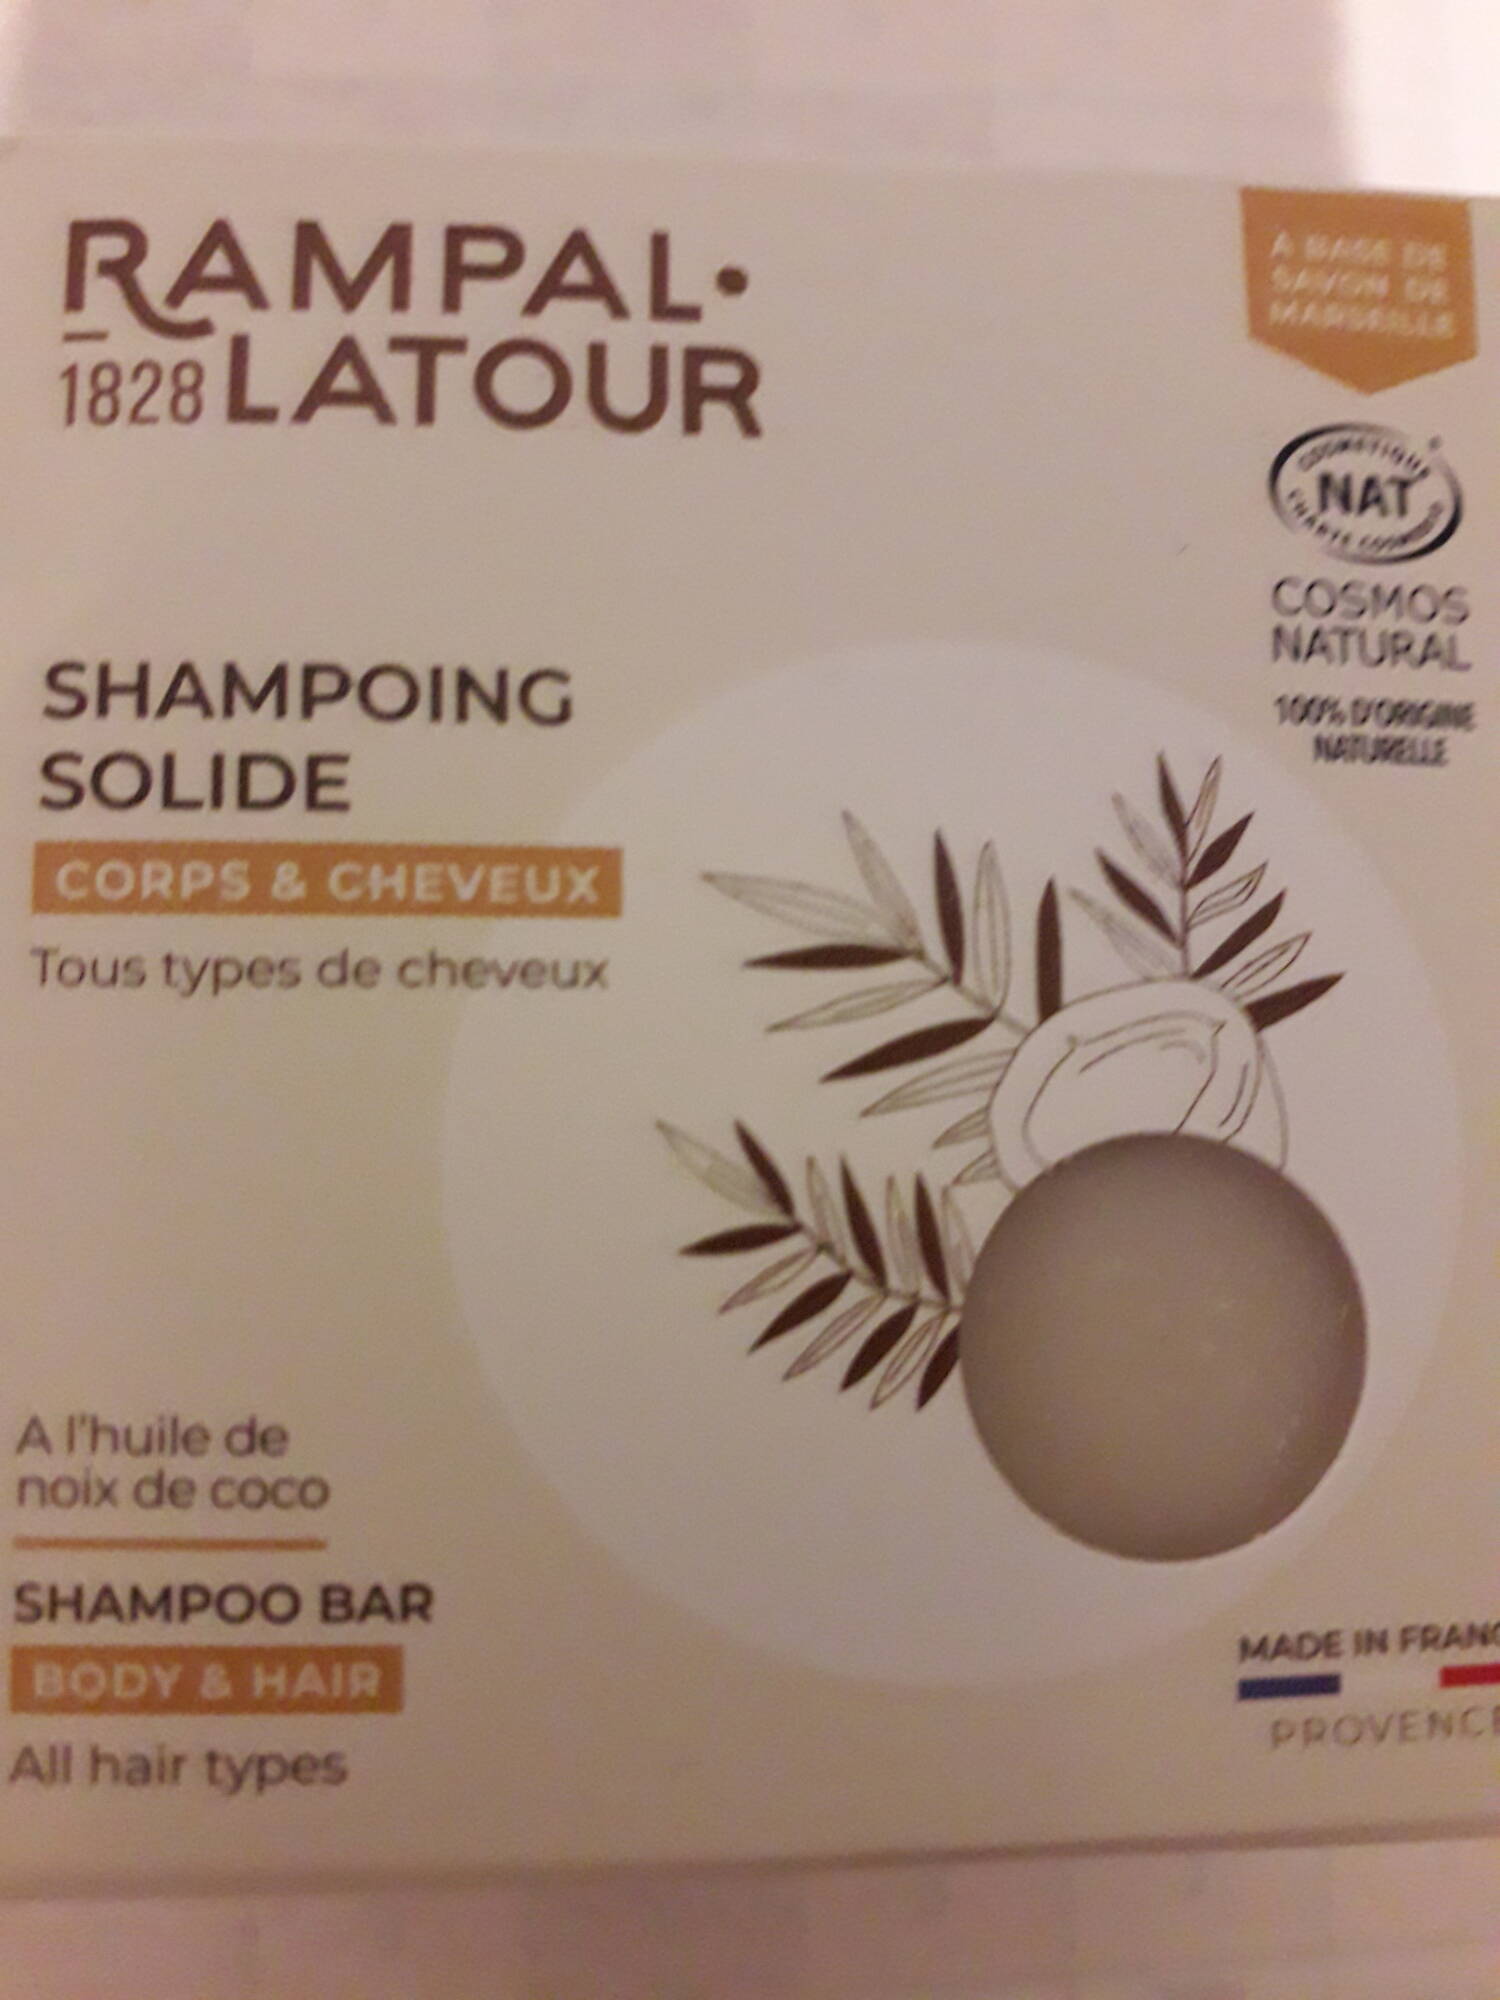 RAMPAL LATOUR - Shampooing solide corps & cheveux